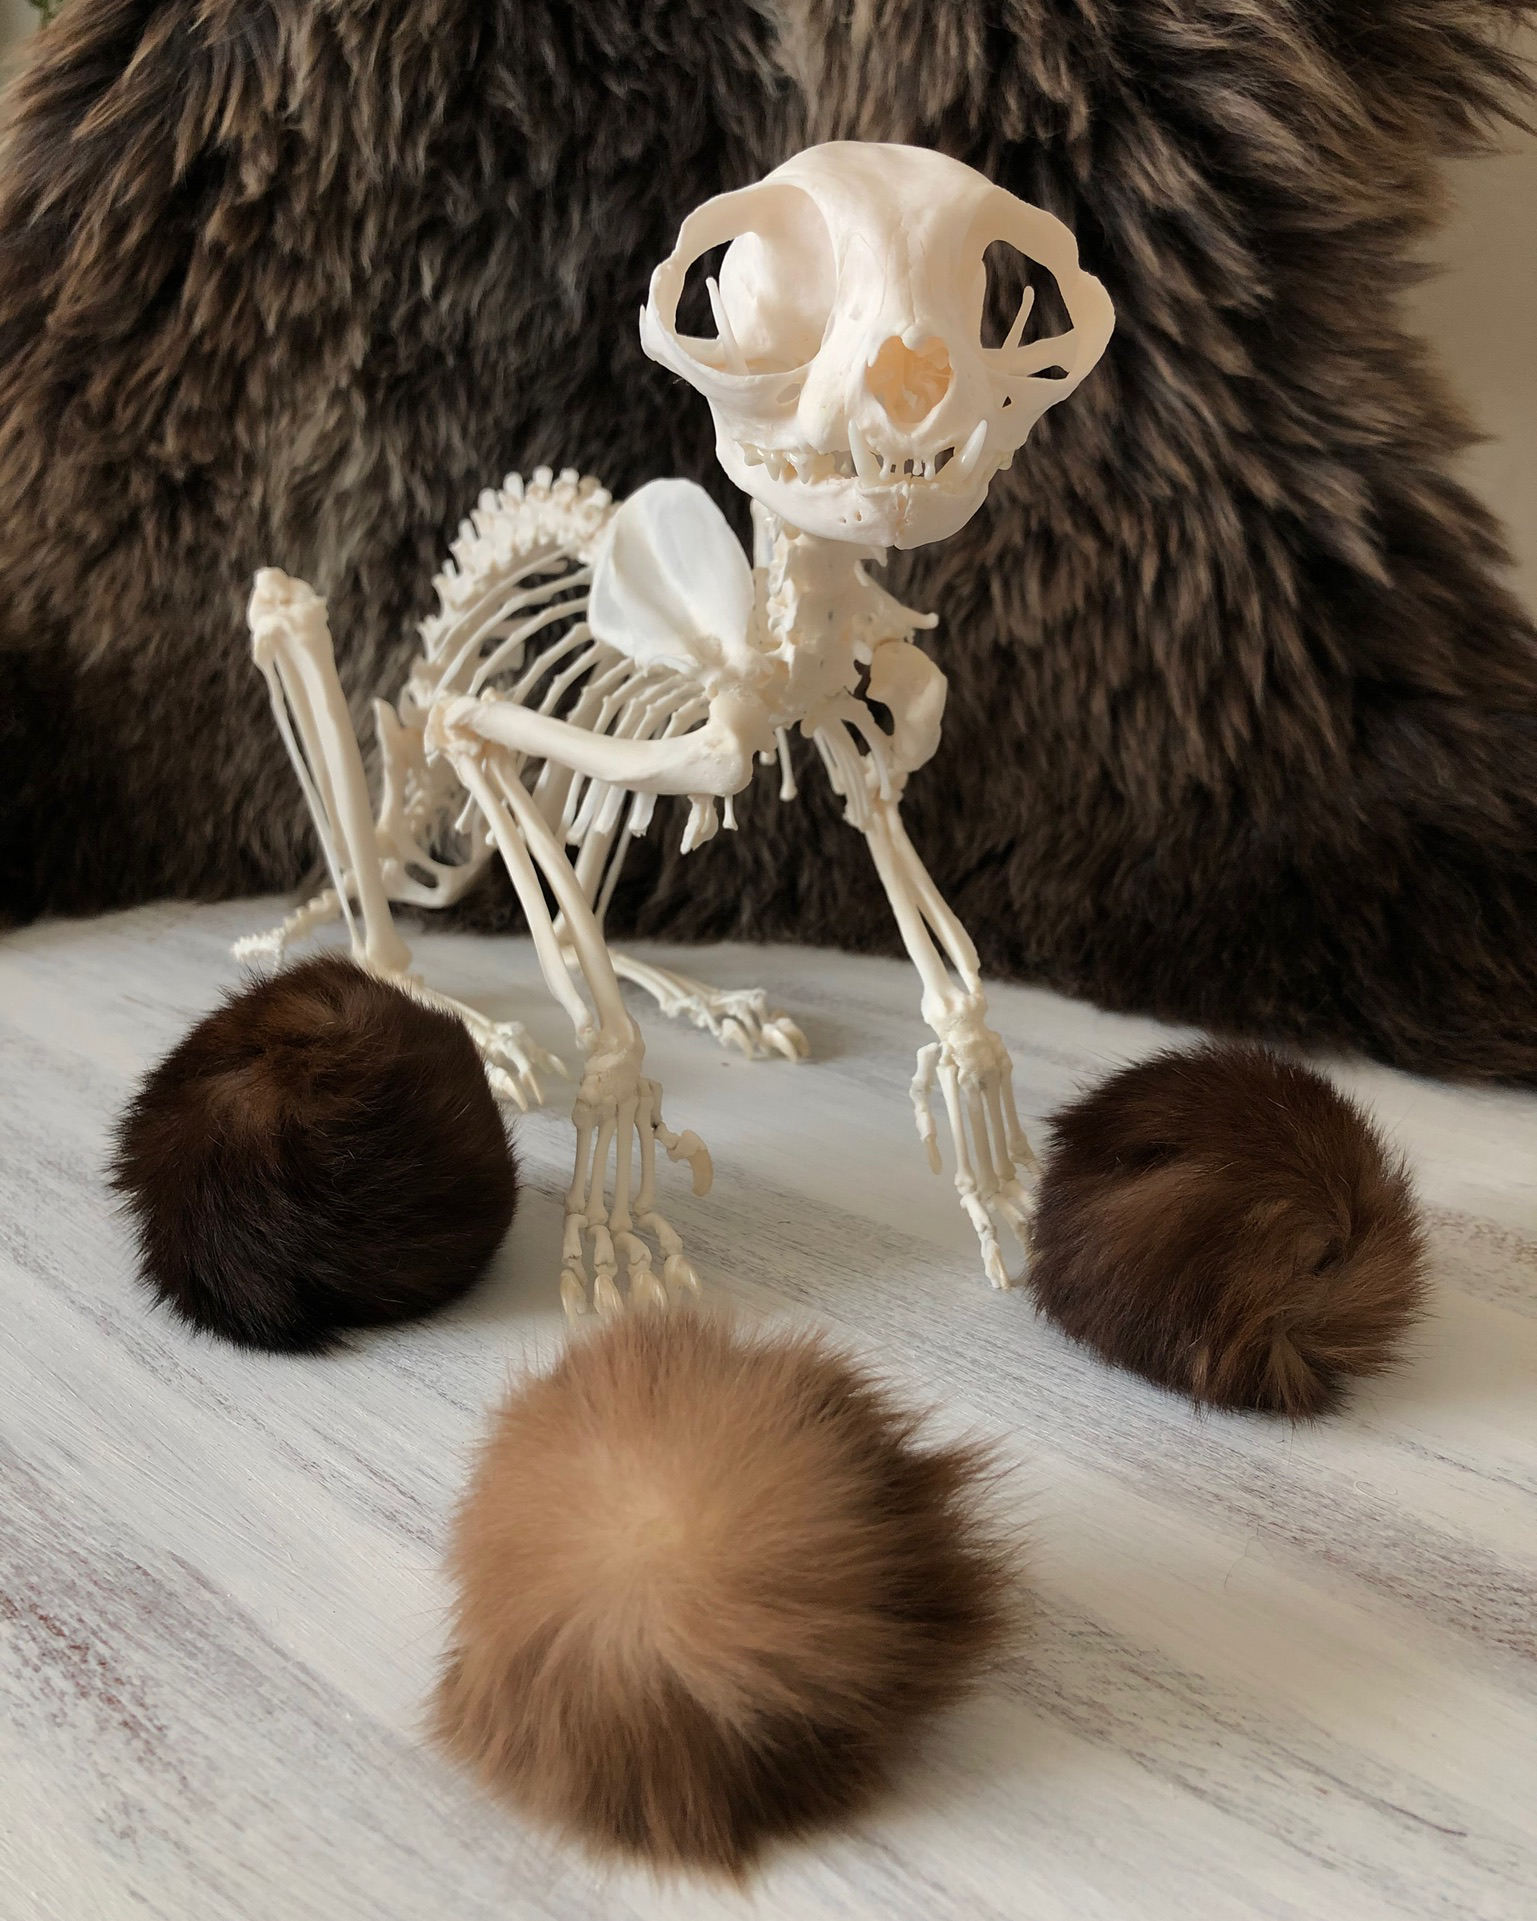 Articulated cat skull facing the camera with fur draped behind it and three preserved coat balls in front